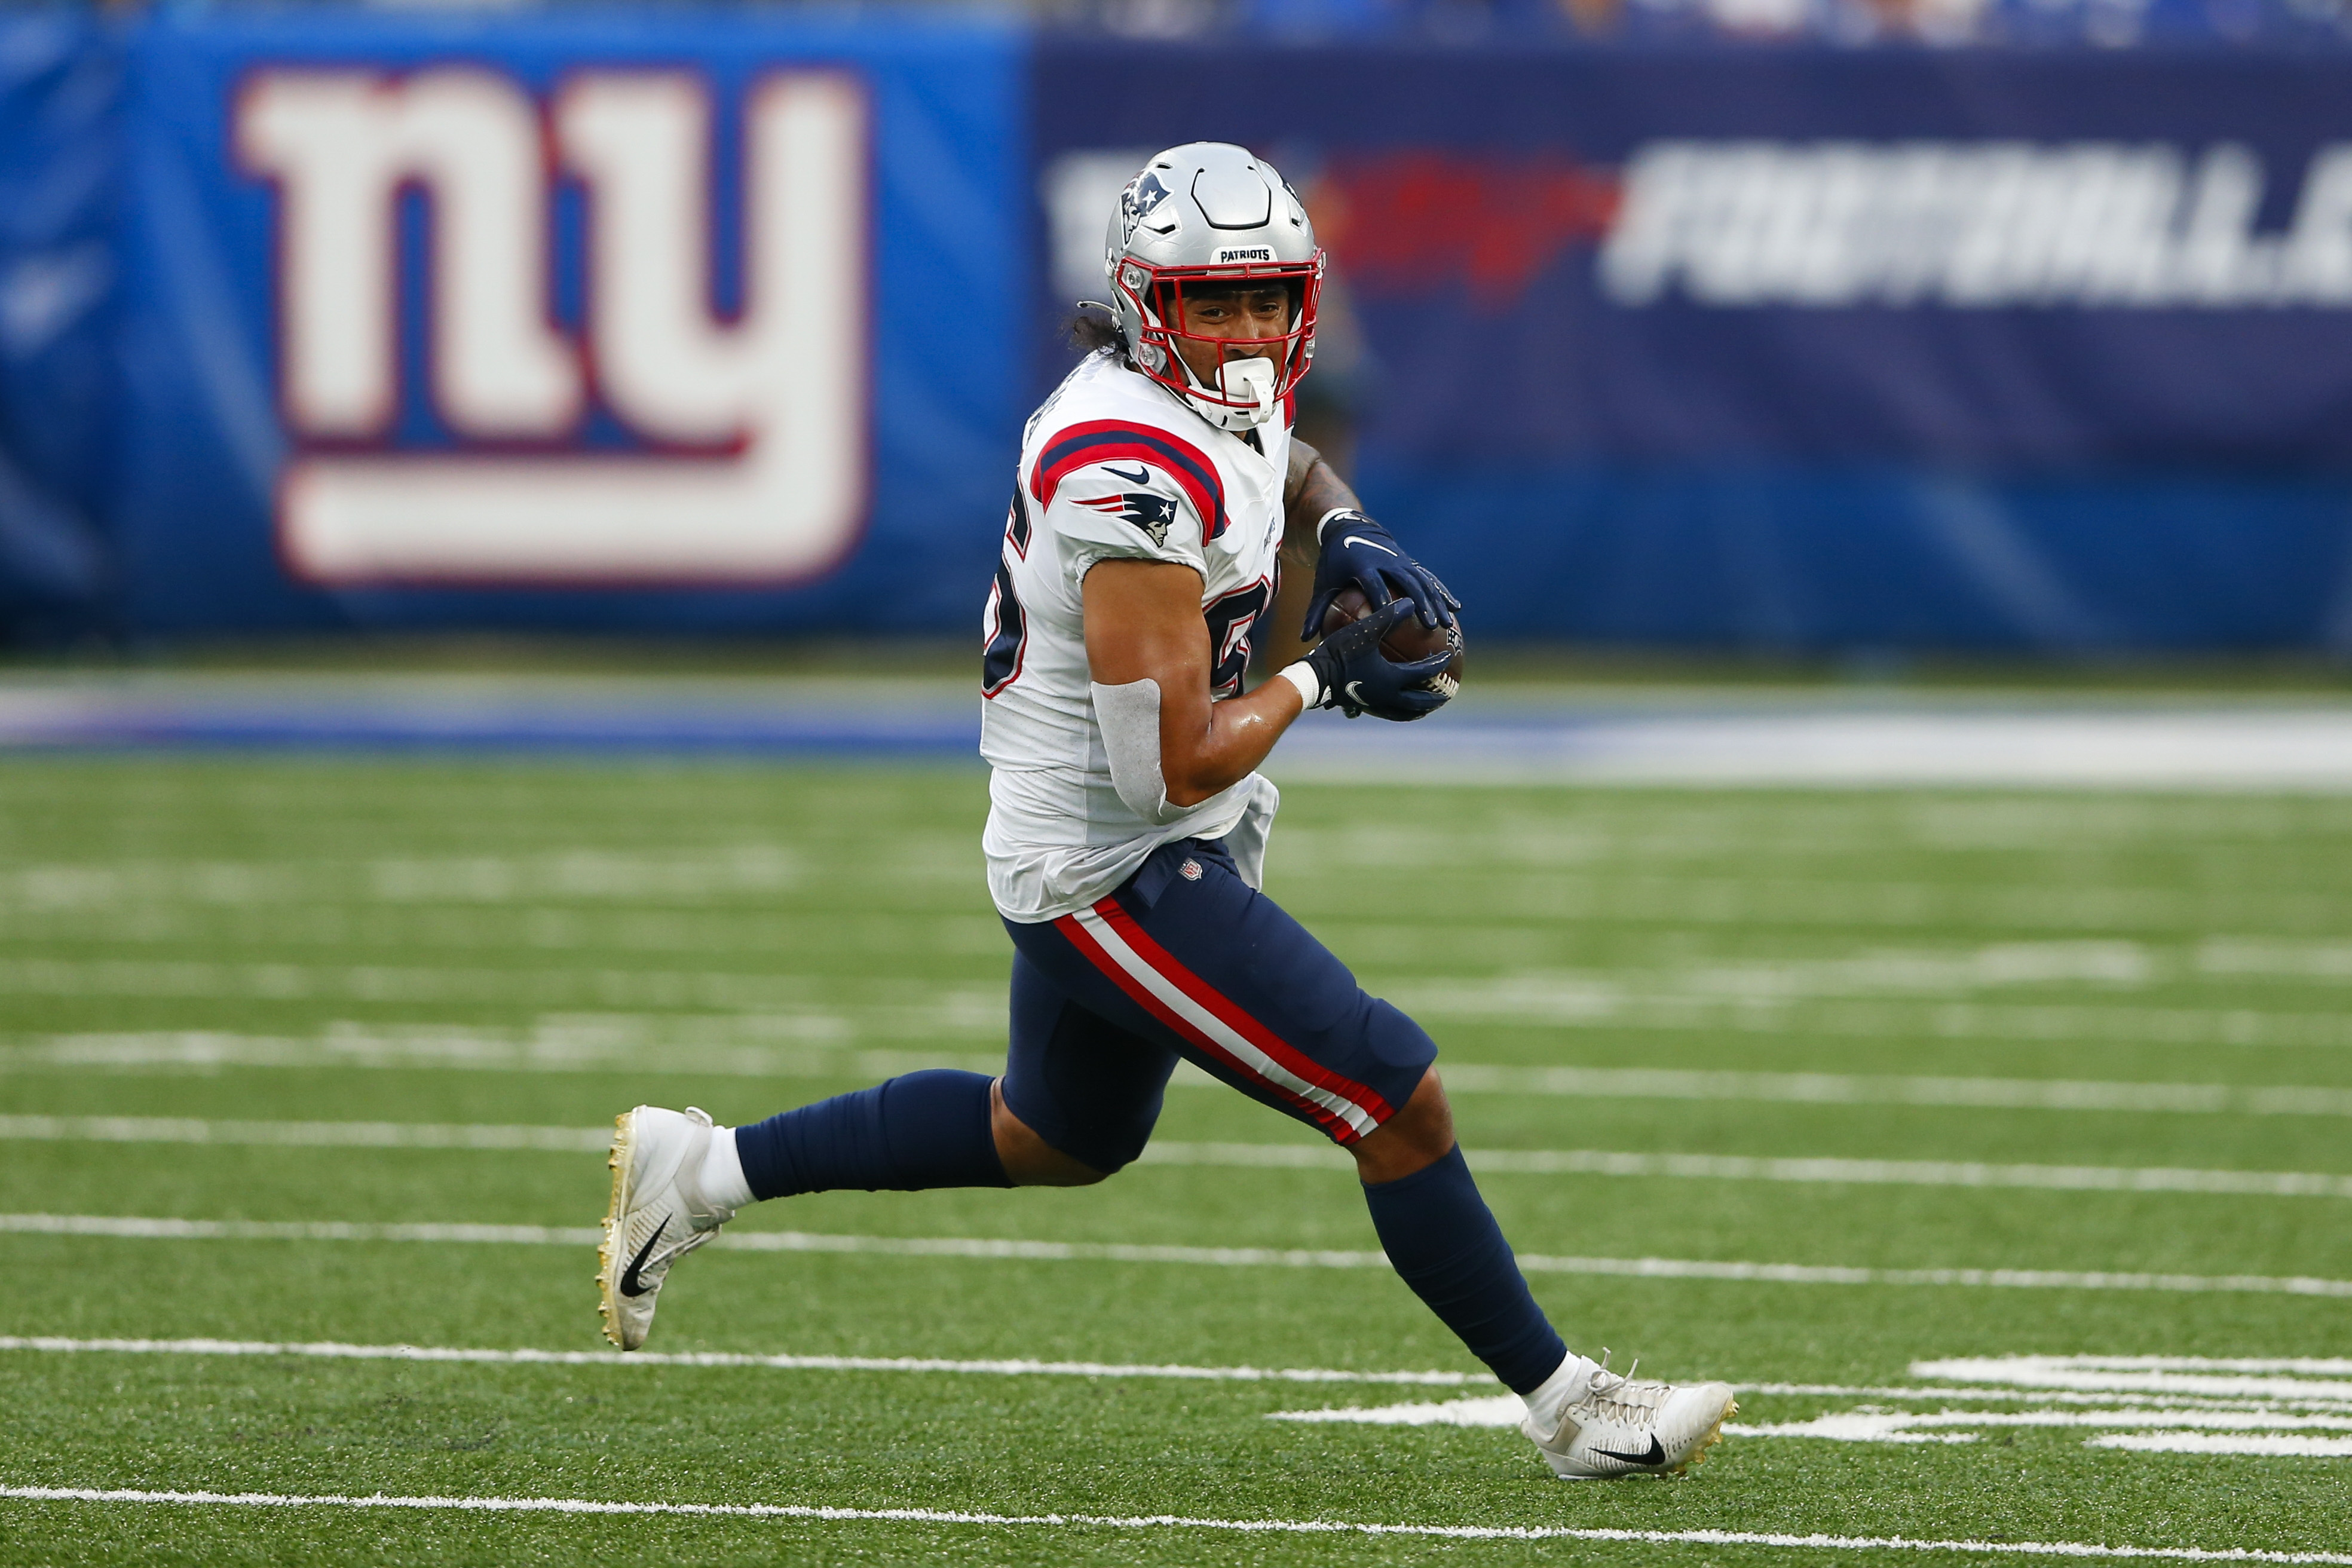 Touchdowns and Highlights of Patriots 22-20 Giants on preseason 2021 NFL